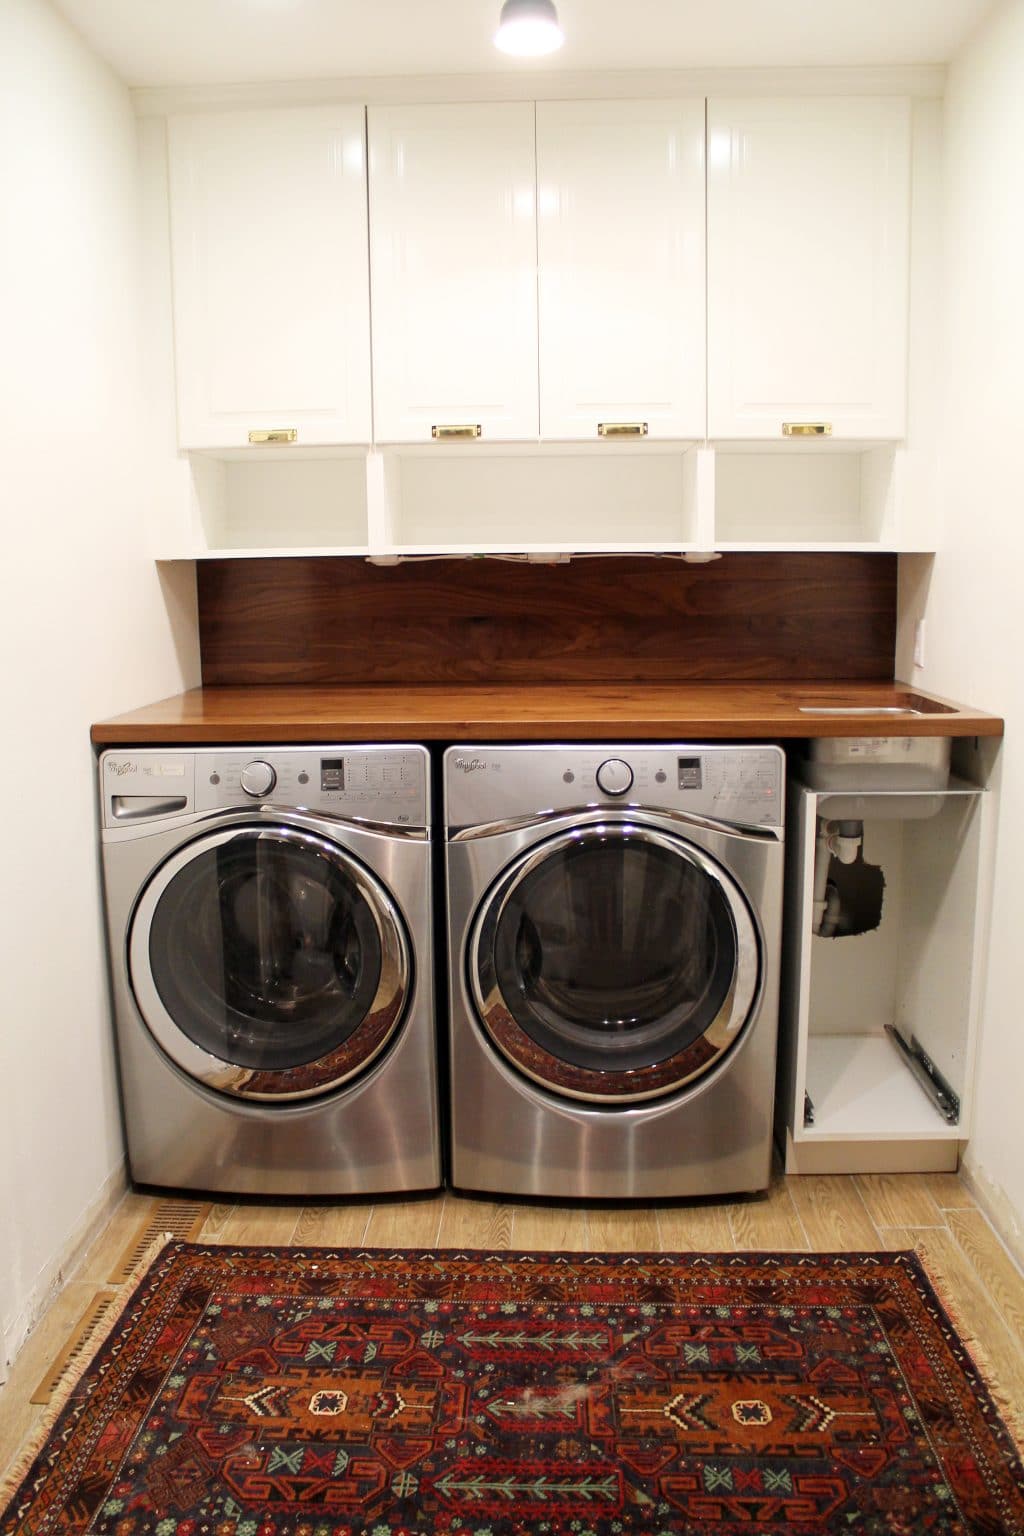 A Walnut Counter And Backsplash in the Laundry Room - Chris Loves